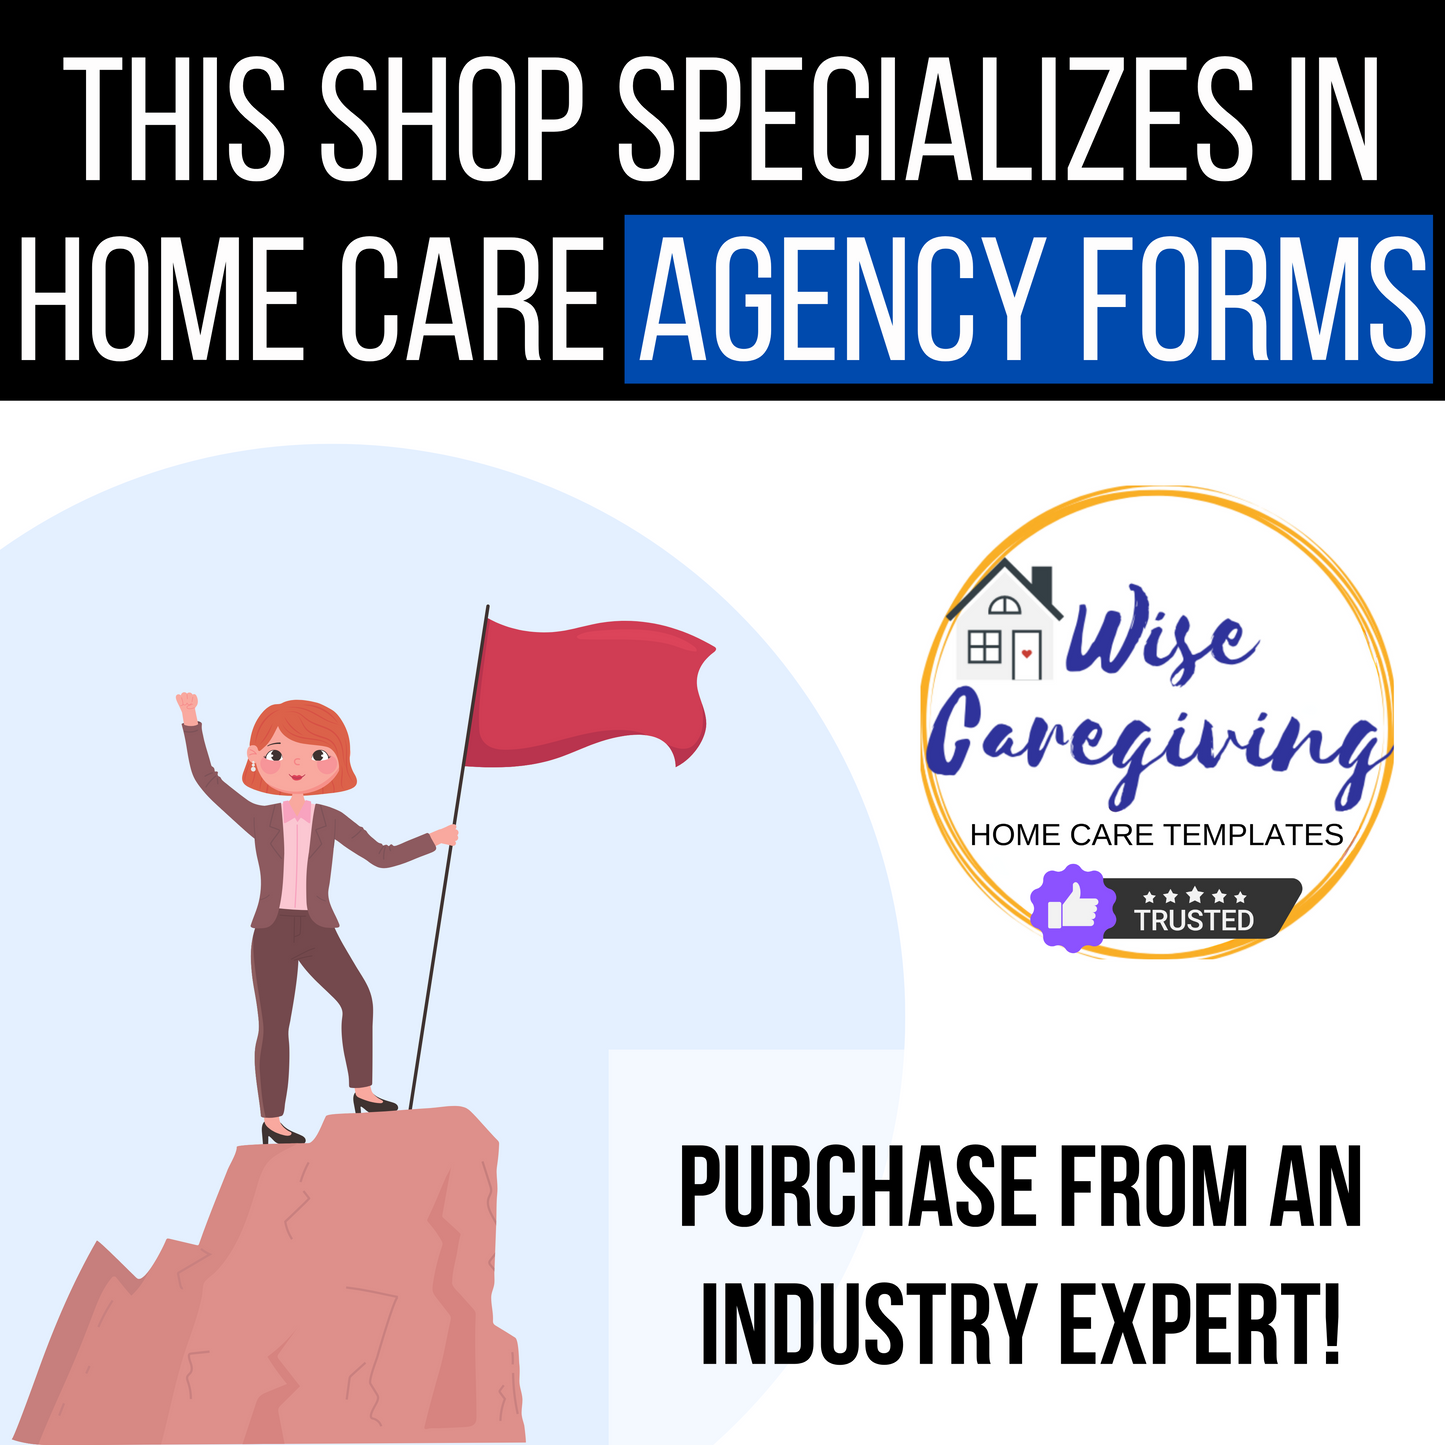 Non Medical Home Care Business-Daily Administrative Forms